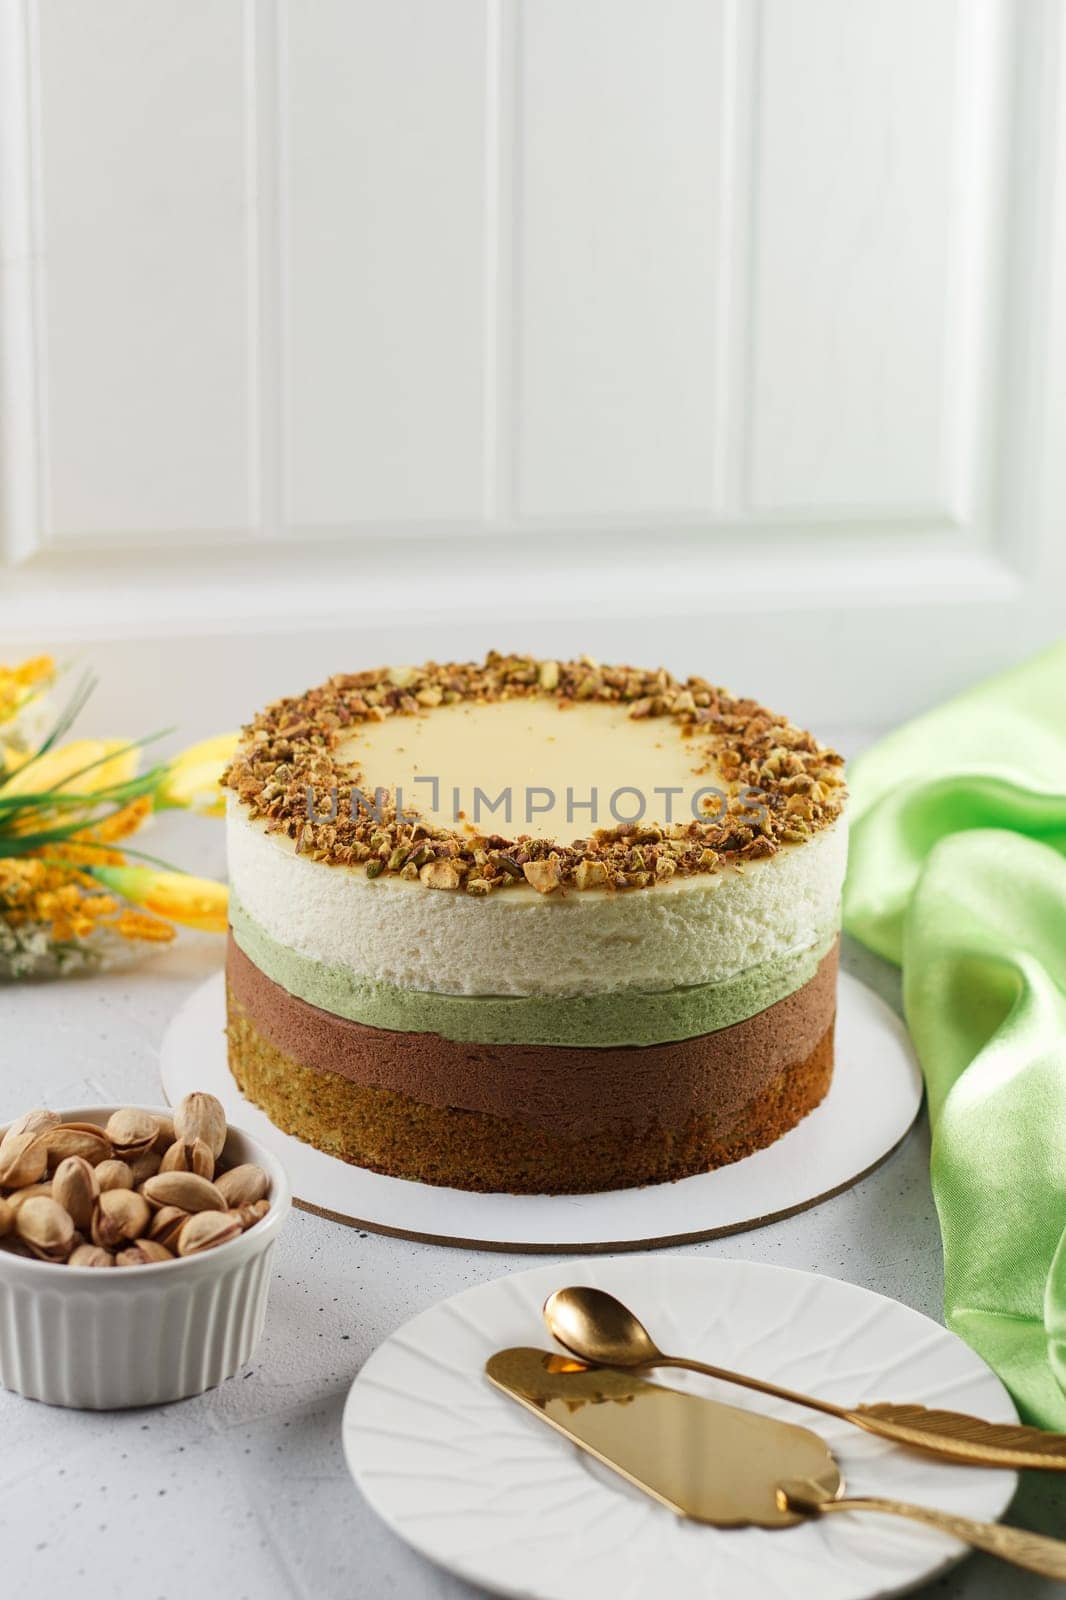 Pistachio cake on the table with cutlery, textile flowers. Ingredients: pistachio sponge cake, pistachio mousse, chocolate mousse and white chocolate mousse. by lara29